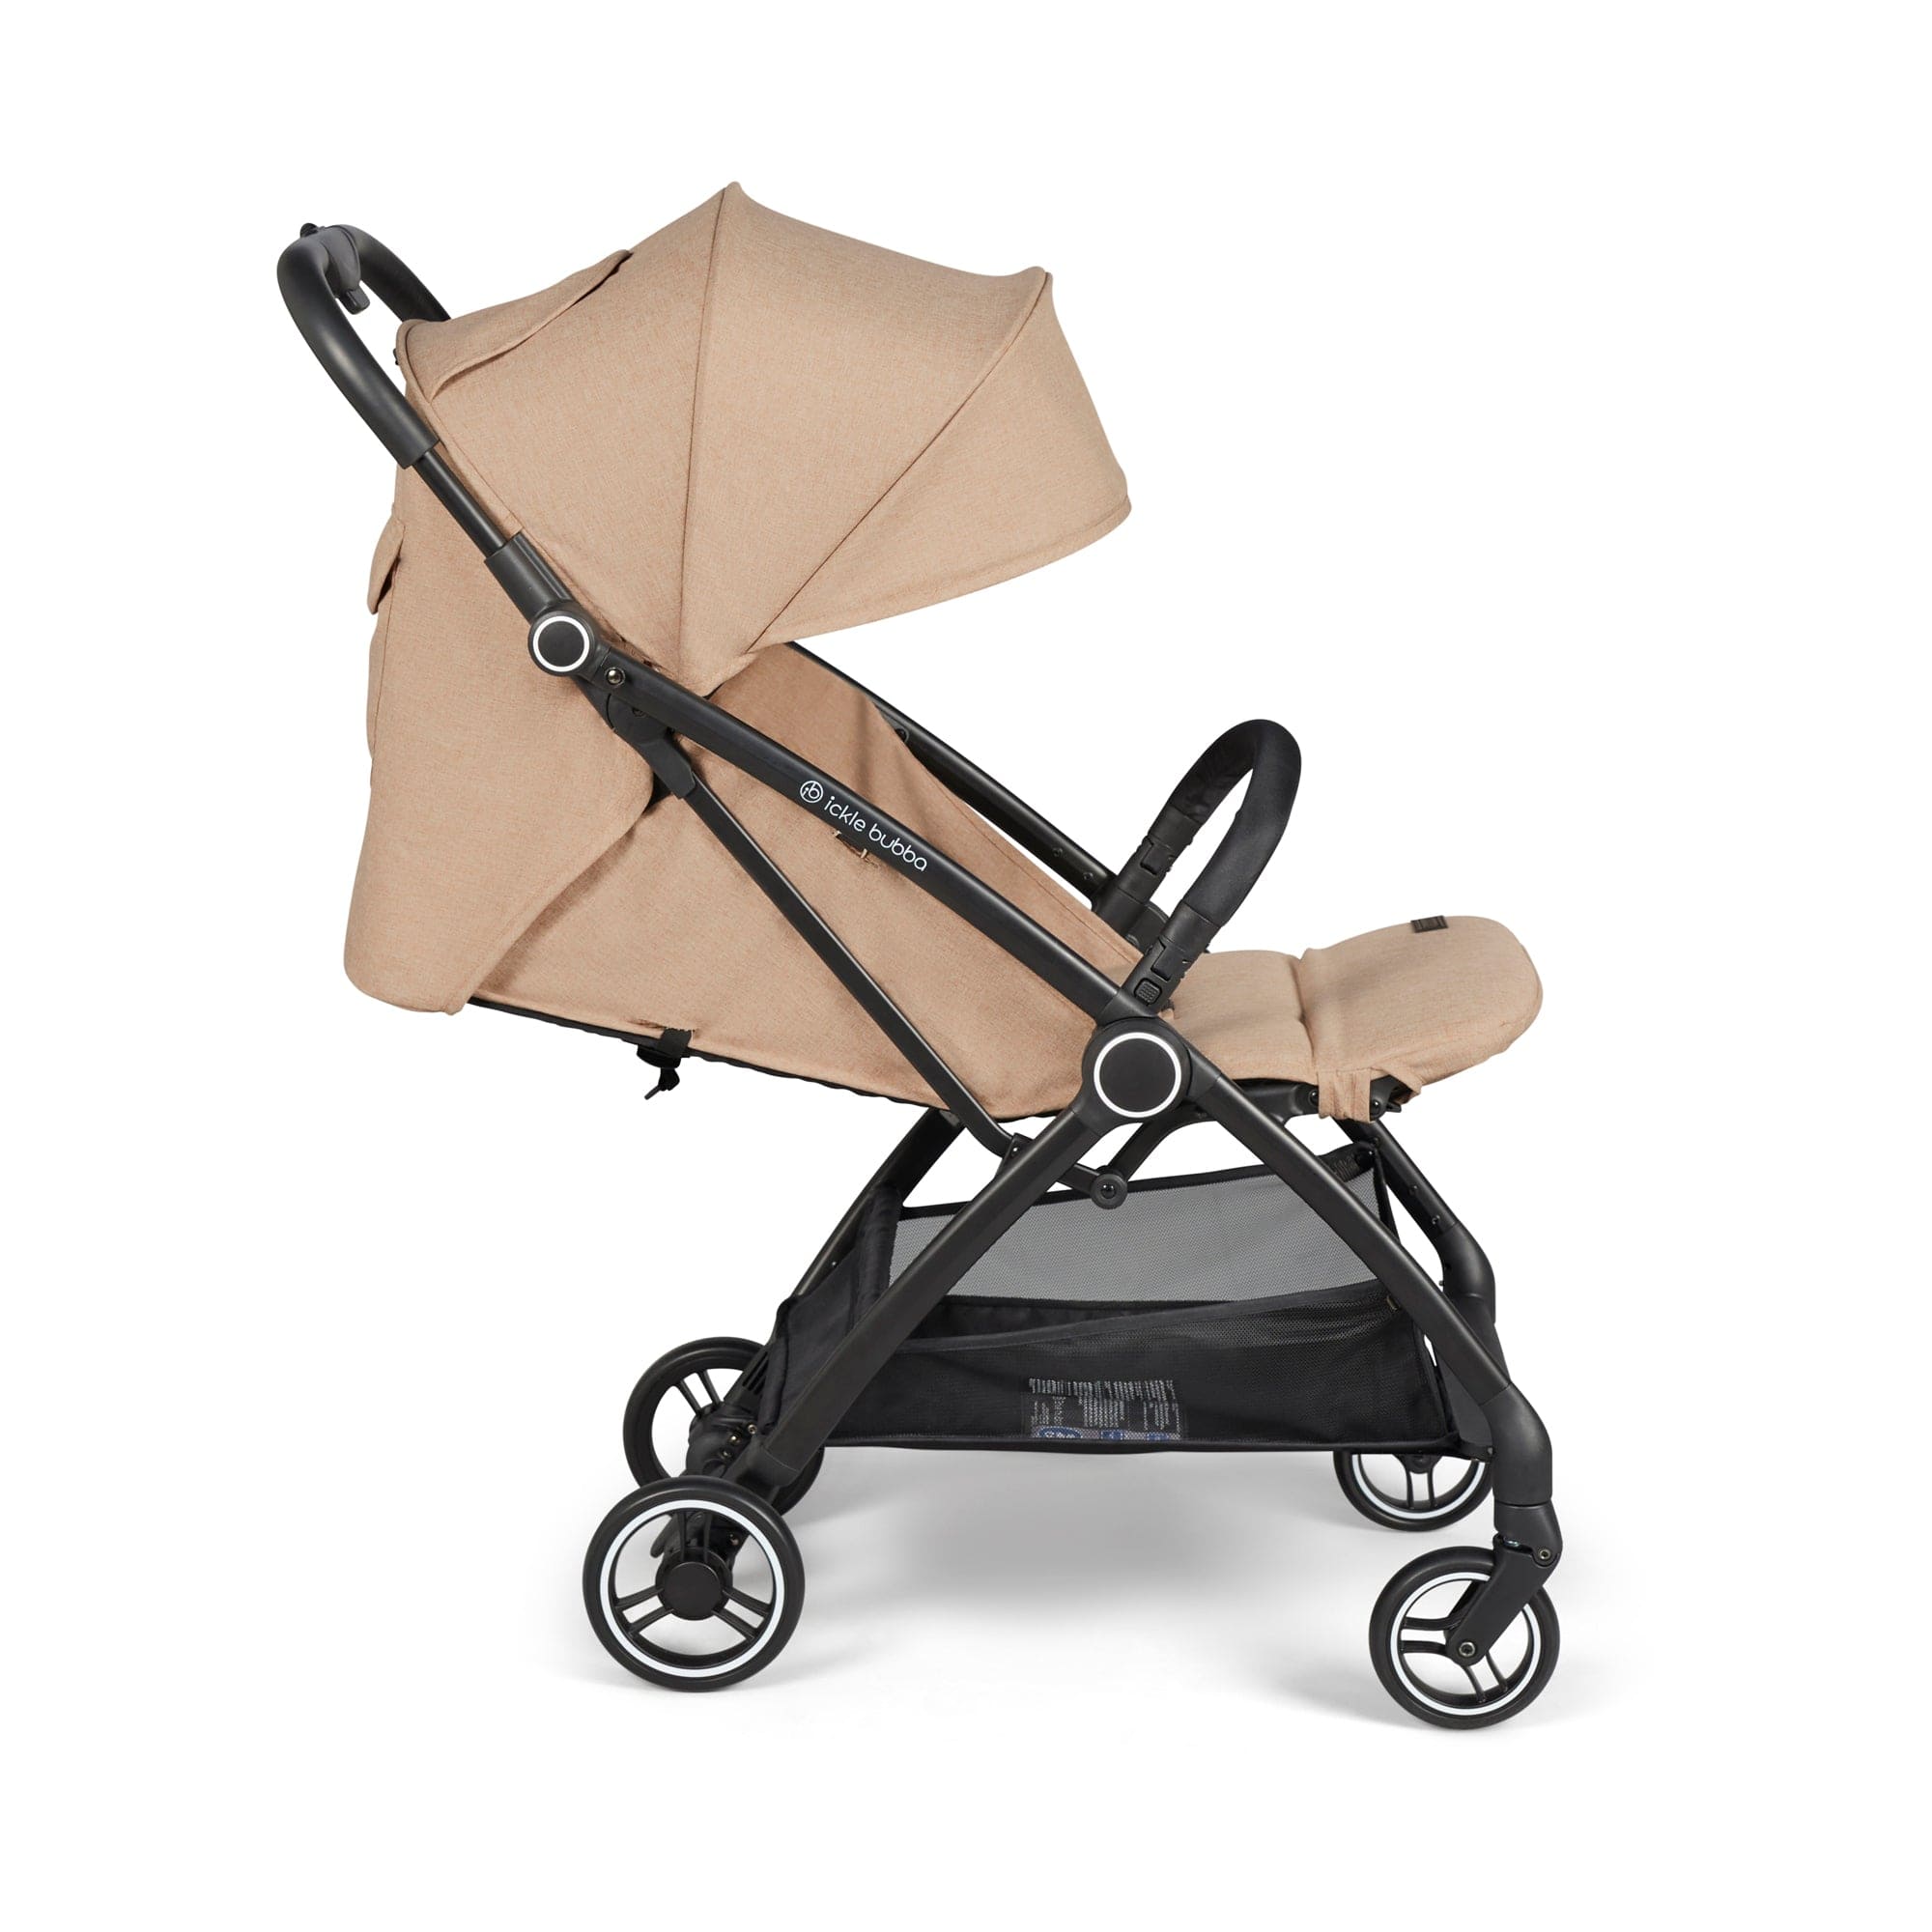 Ickle Bubba Aries Max Autofold Stroller in Biscuit Pushchairs & Buggies 15-005-200-157 5056515031287